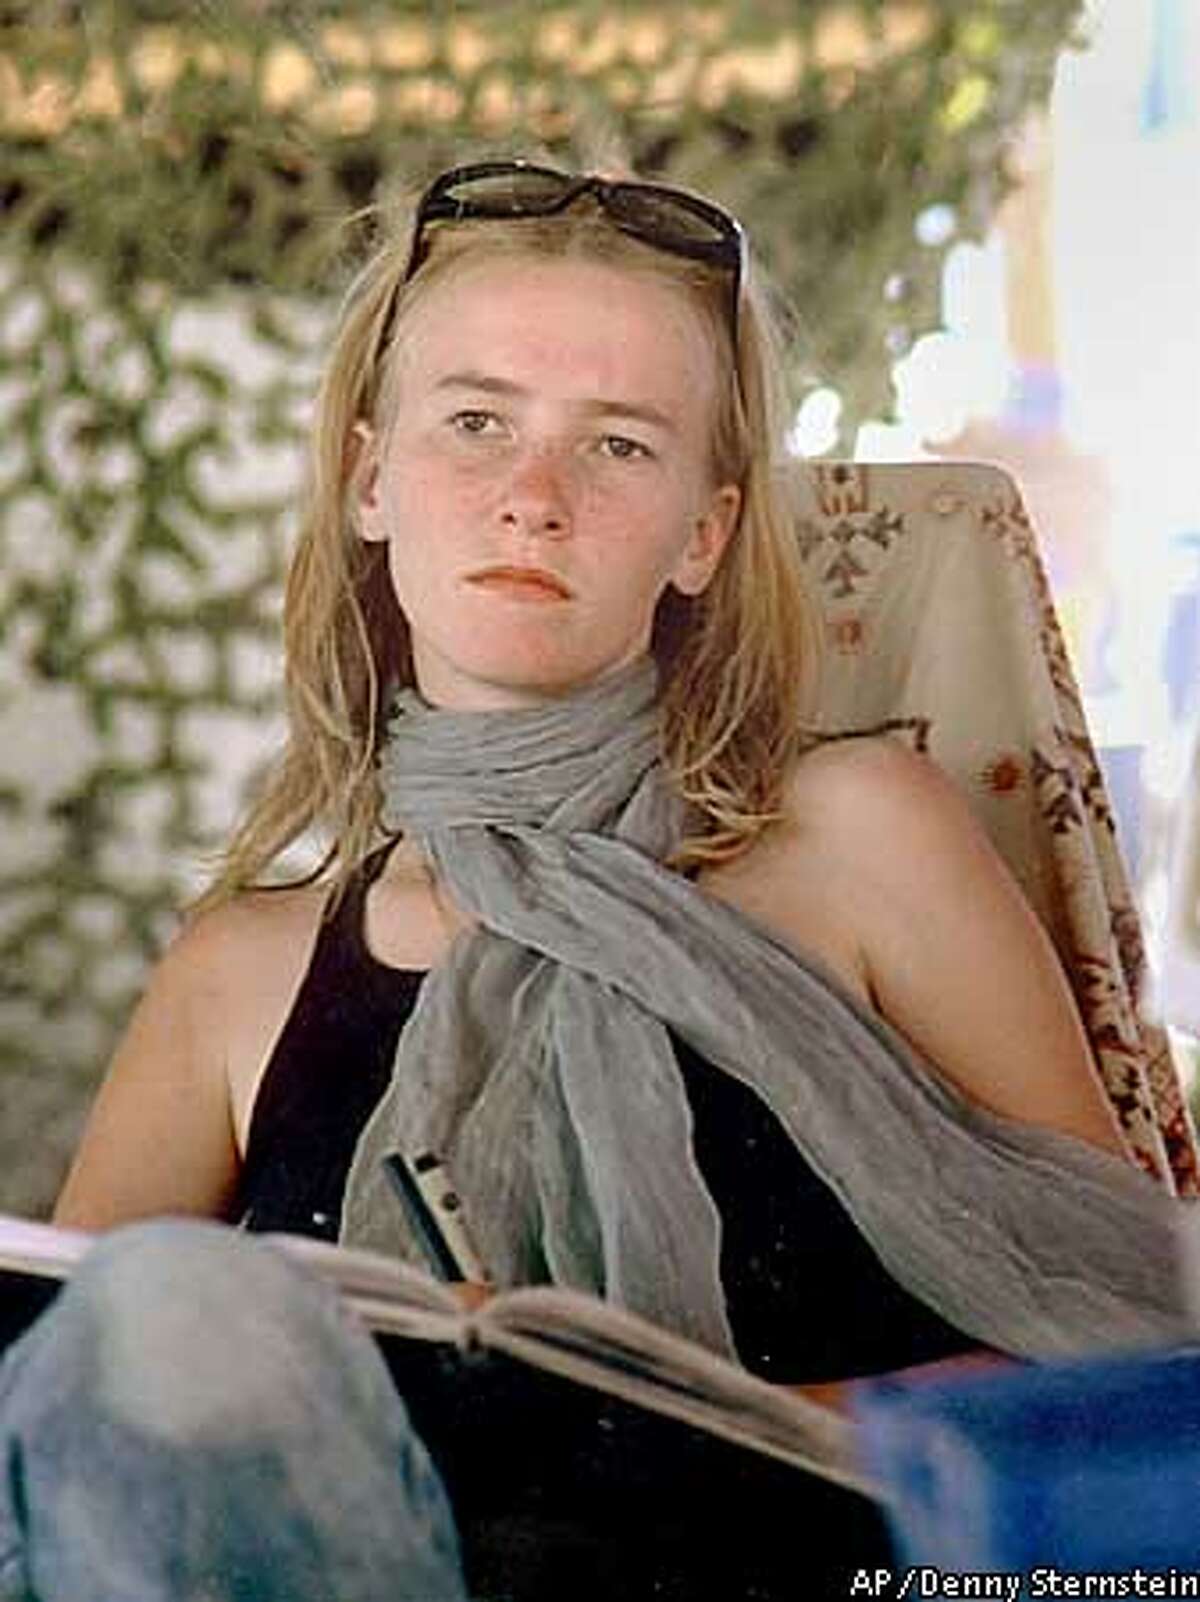 Peace activist Rachel Corrie is shown at the Burning Man festival in a photo from September 2002, in Black Rock City, Nev. Corrie, 23, a student at The Evergreen State College in Olympia, Wash., died Sunday, March 16, 2003, in the Gaza Strip city of Rafah while trying to stop a bulldozer from tearing down a Palestinian physician's home. She fell in front of the machine, which ran over her and then backed up, witnesses said. Israeli military spokesman Capt. Jacob Dallal called her death an accident. State Department spokesman Lou Fintor said the U.S. government had asked Israeli officials for a full investigation. (AP Photo/Denny Sternstein)